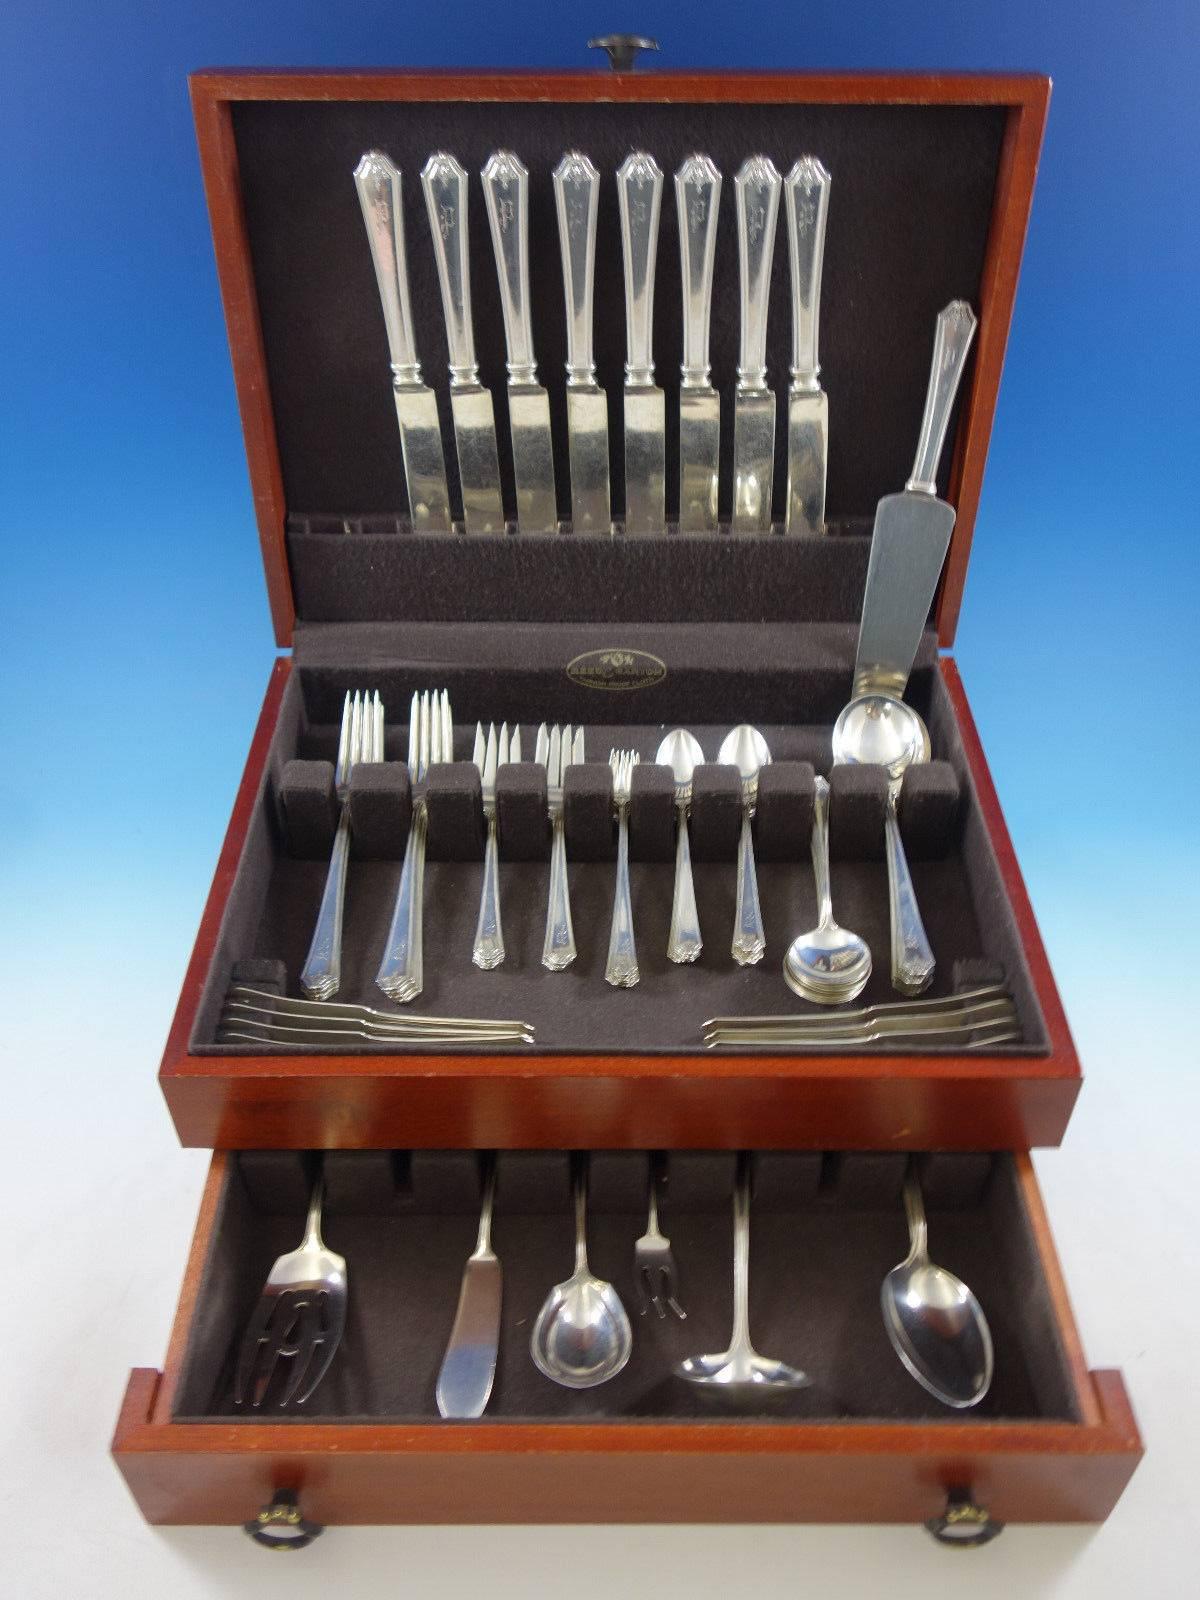 Rosalind by International sterling silver flatware set, 80 pieces. This set includes: 

Eight dinner size knives, 9 3/4